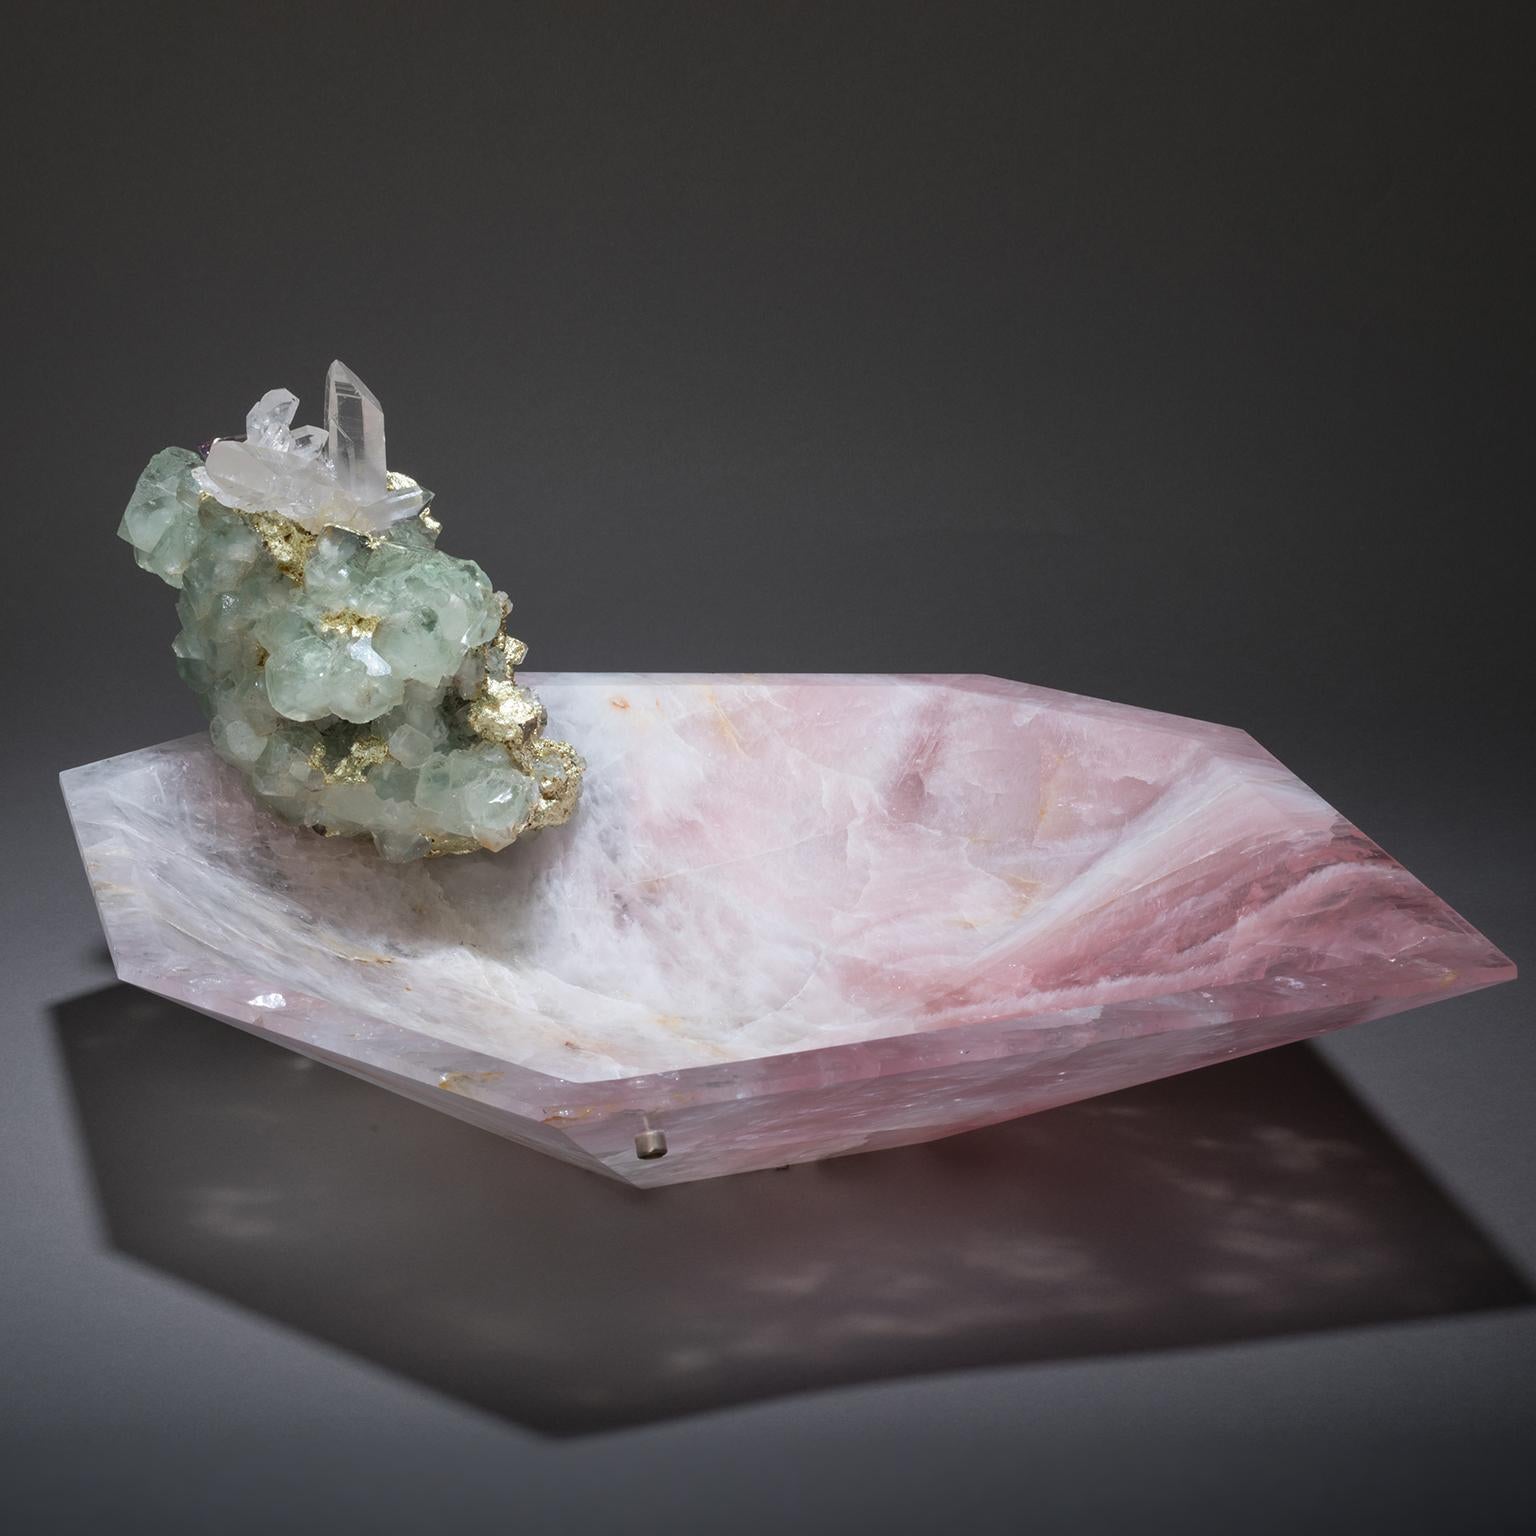 CRYSTAL  BLING  BOWL  9
Love  in  all  its  forms  blossoms  in  Studio  Greytak’s  Crystal  Bling  Bowl  9.  A  single-cut  bowl  of  rose  quartz,  imbued  with  the  power  of  Aphrodite’s  passion,  offers  a  tender  welcome.  Playful  fluorite